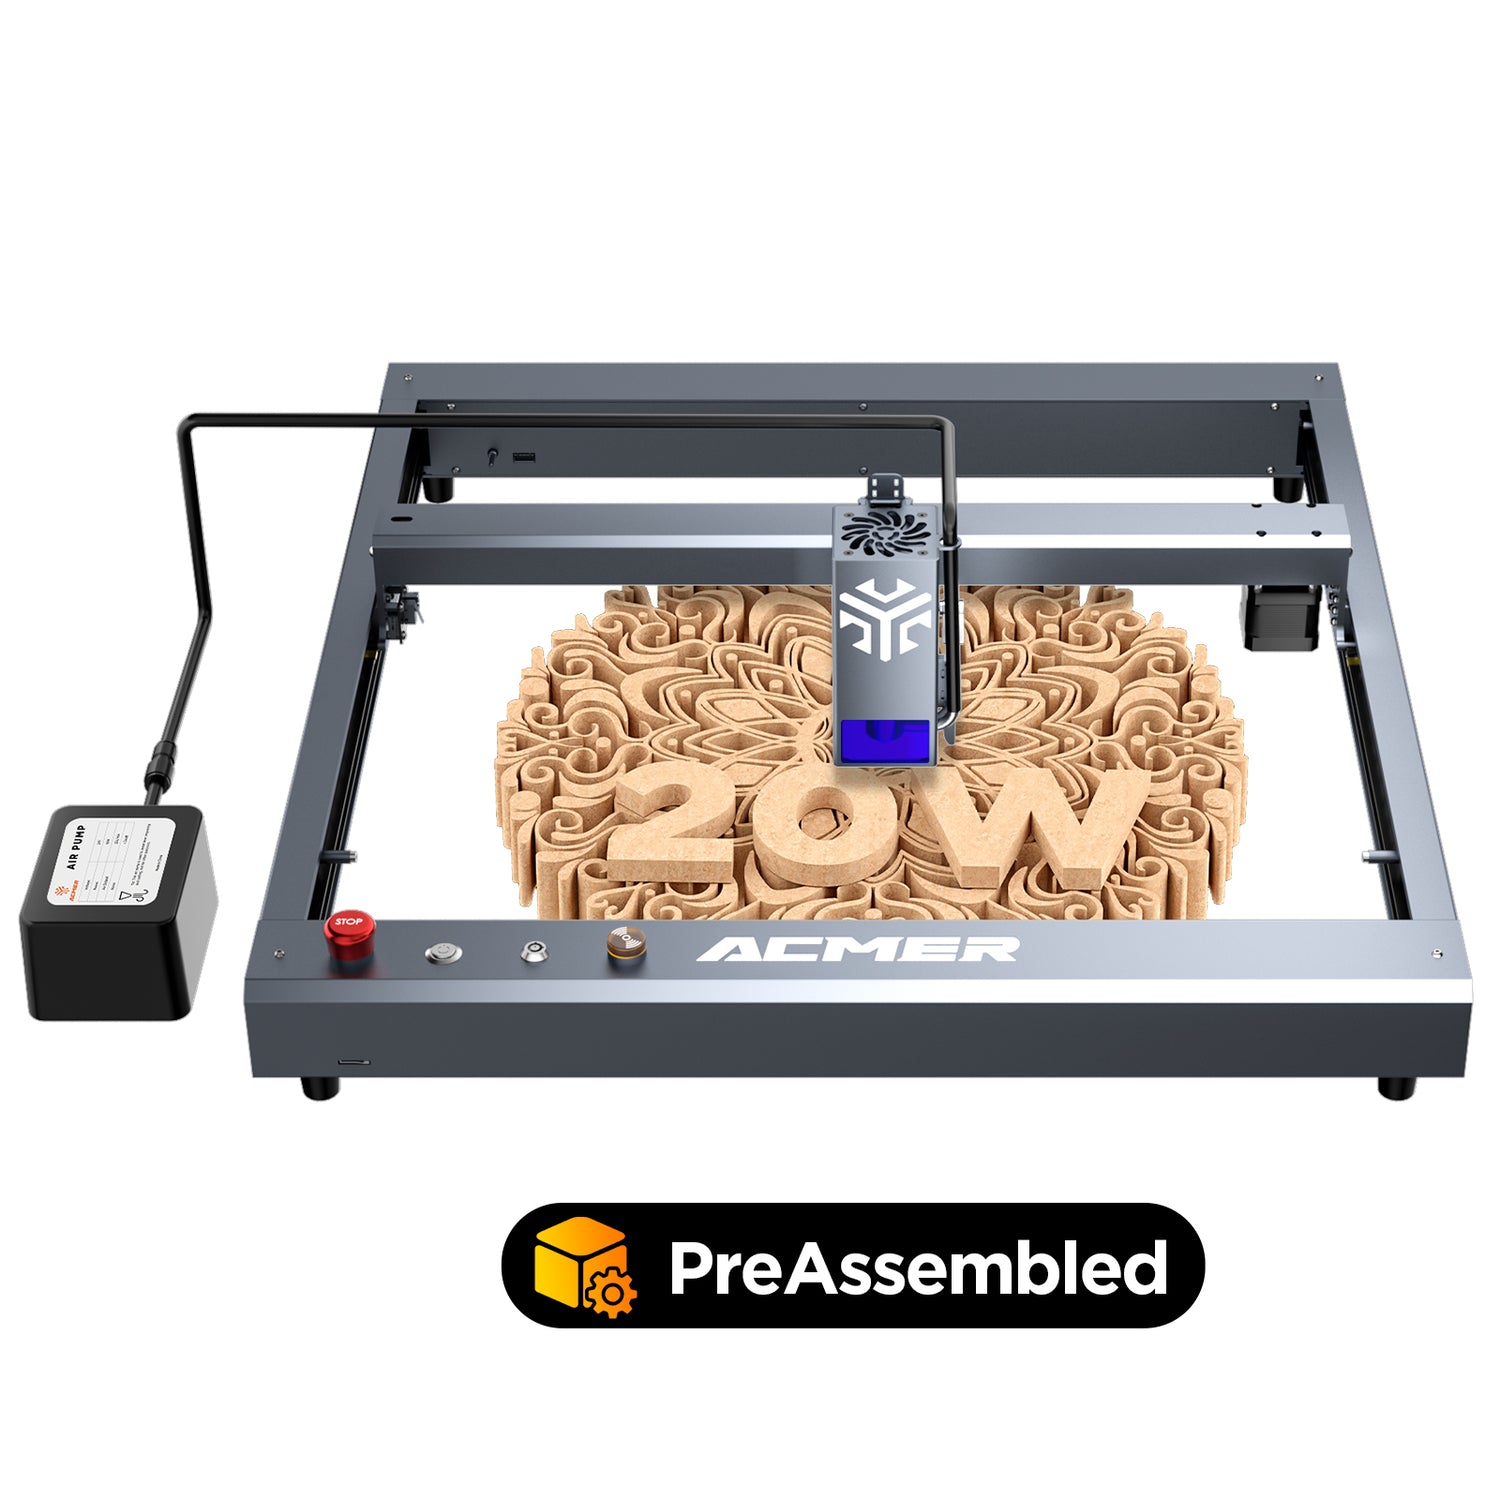 ACMER P2 20W Laser Engraver and Cutter Machine with Automatic Air